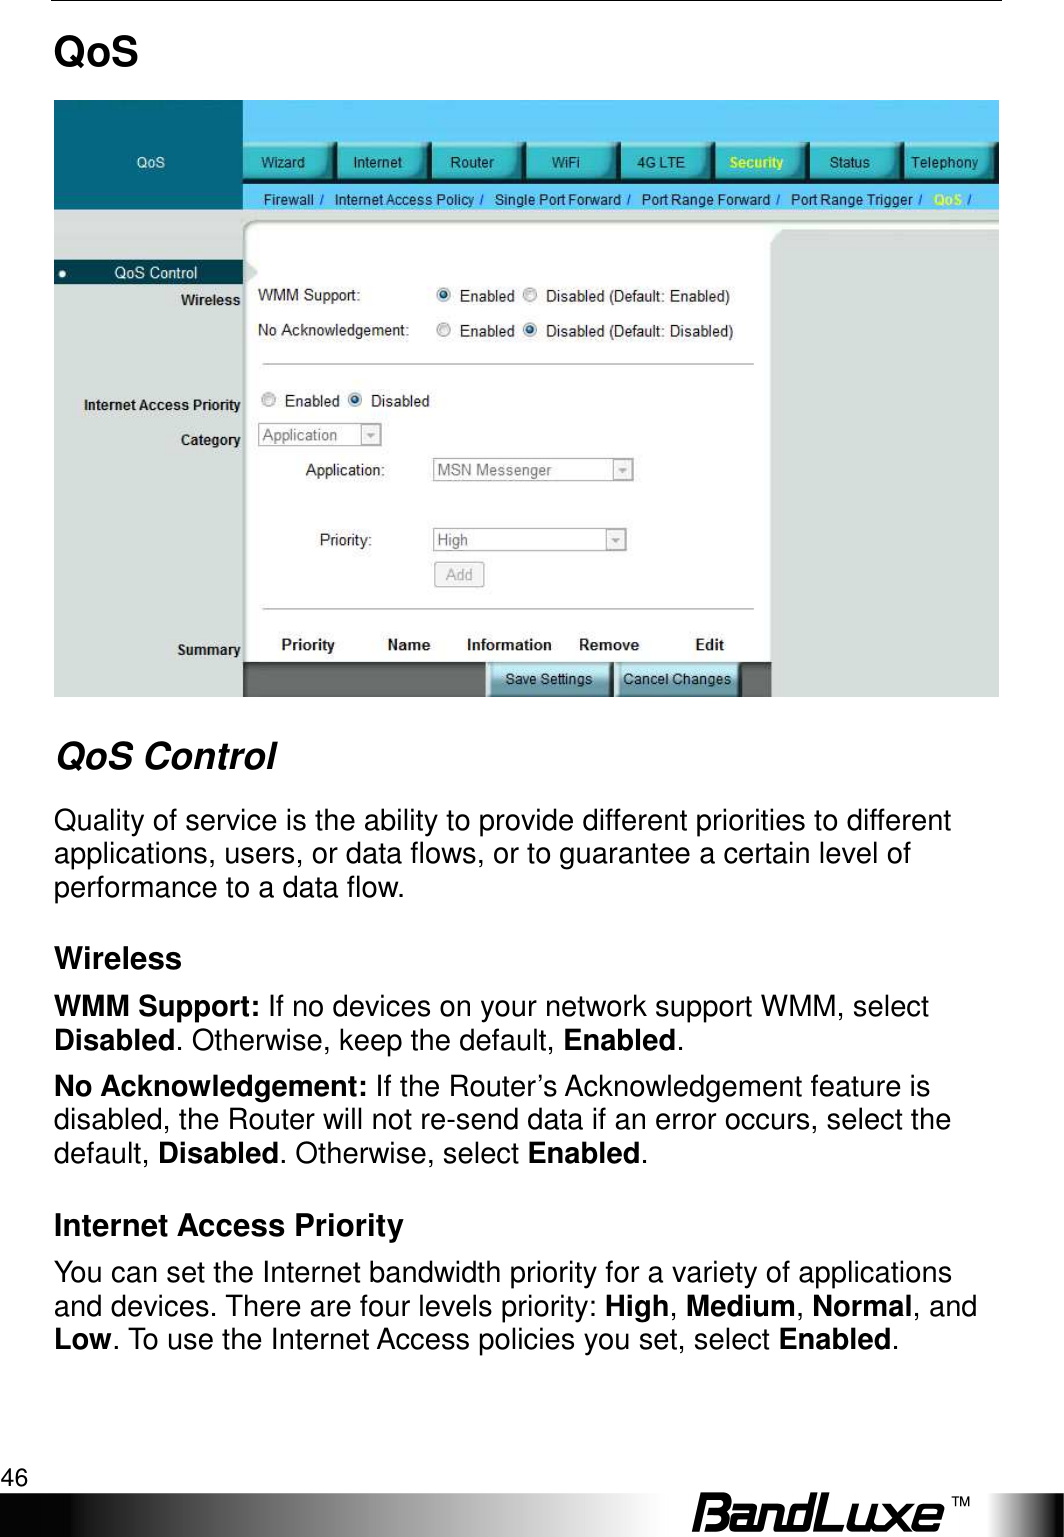 Security Setup 46  QoS  QoS Control Quality of service is the ability to provide different priorities to different applications, users, or data flows, or to guarantee a certain level of performance to a data flow. Wireless WMM Support: If no devices on your network support WMM, select Disabled. Otherwise, keep the default, Enabled. No Acknowledgement: If the Router’s Acknowledgement feature is disabled, the Router will not re-send data if an error occurs, select the default, Disabled. Otherwise, select Enabled. Internet Access Priority You can set the Internet bandwidth priority for a variety of applications and devices. There are four levels priority: High, Medium, Normal, and Low. To use the Internet Access policies you set, select Enabled. 